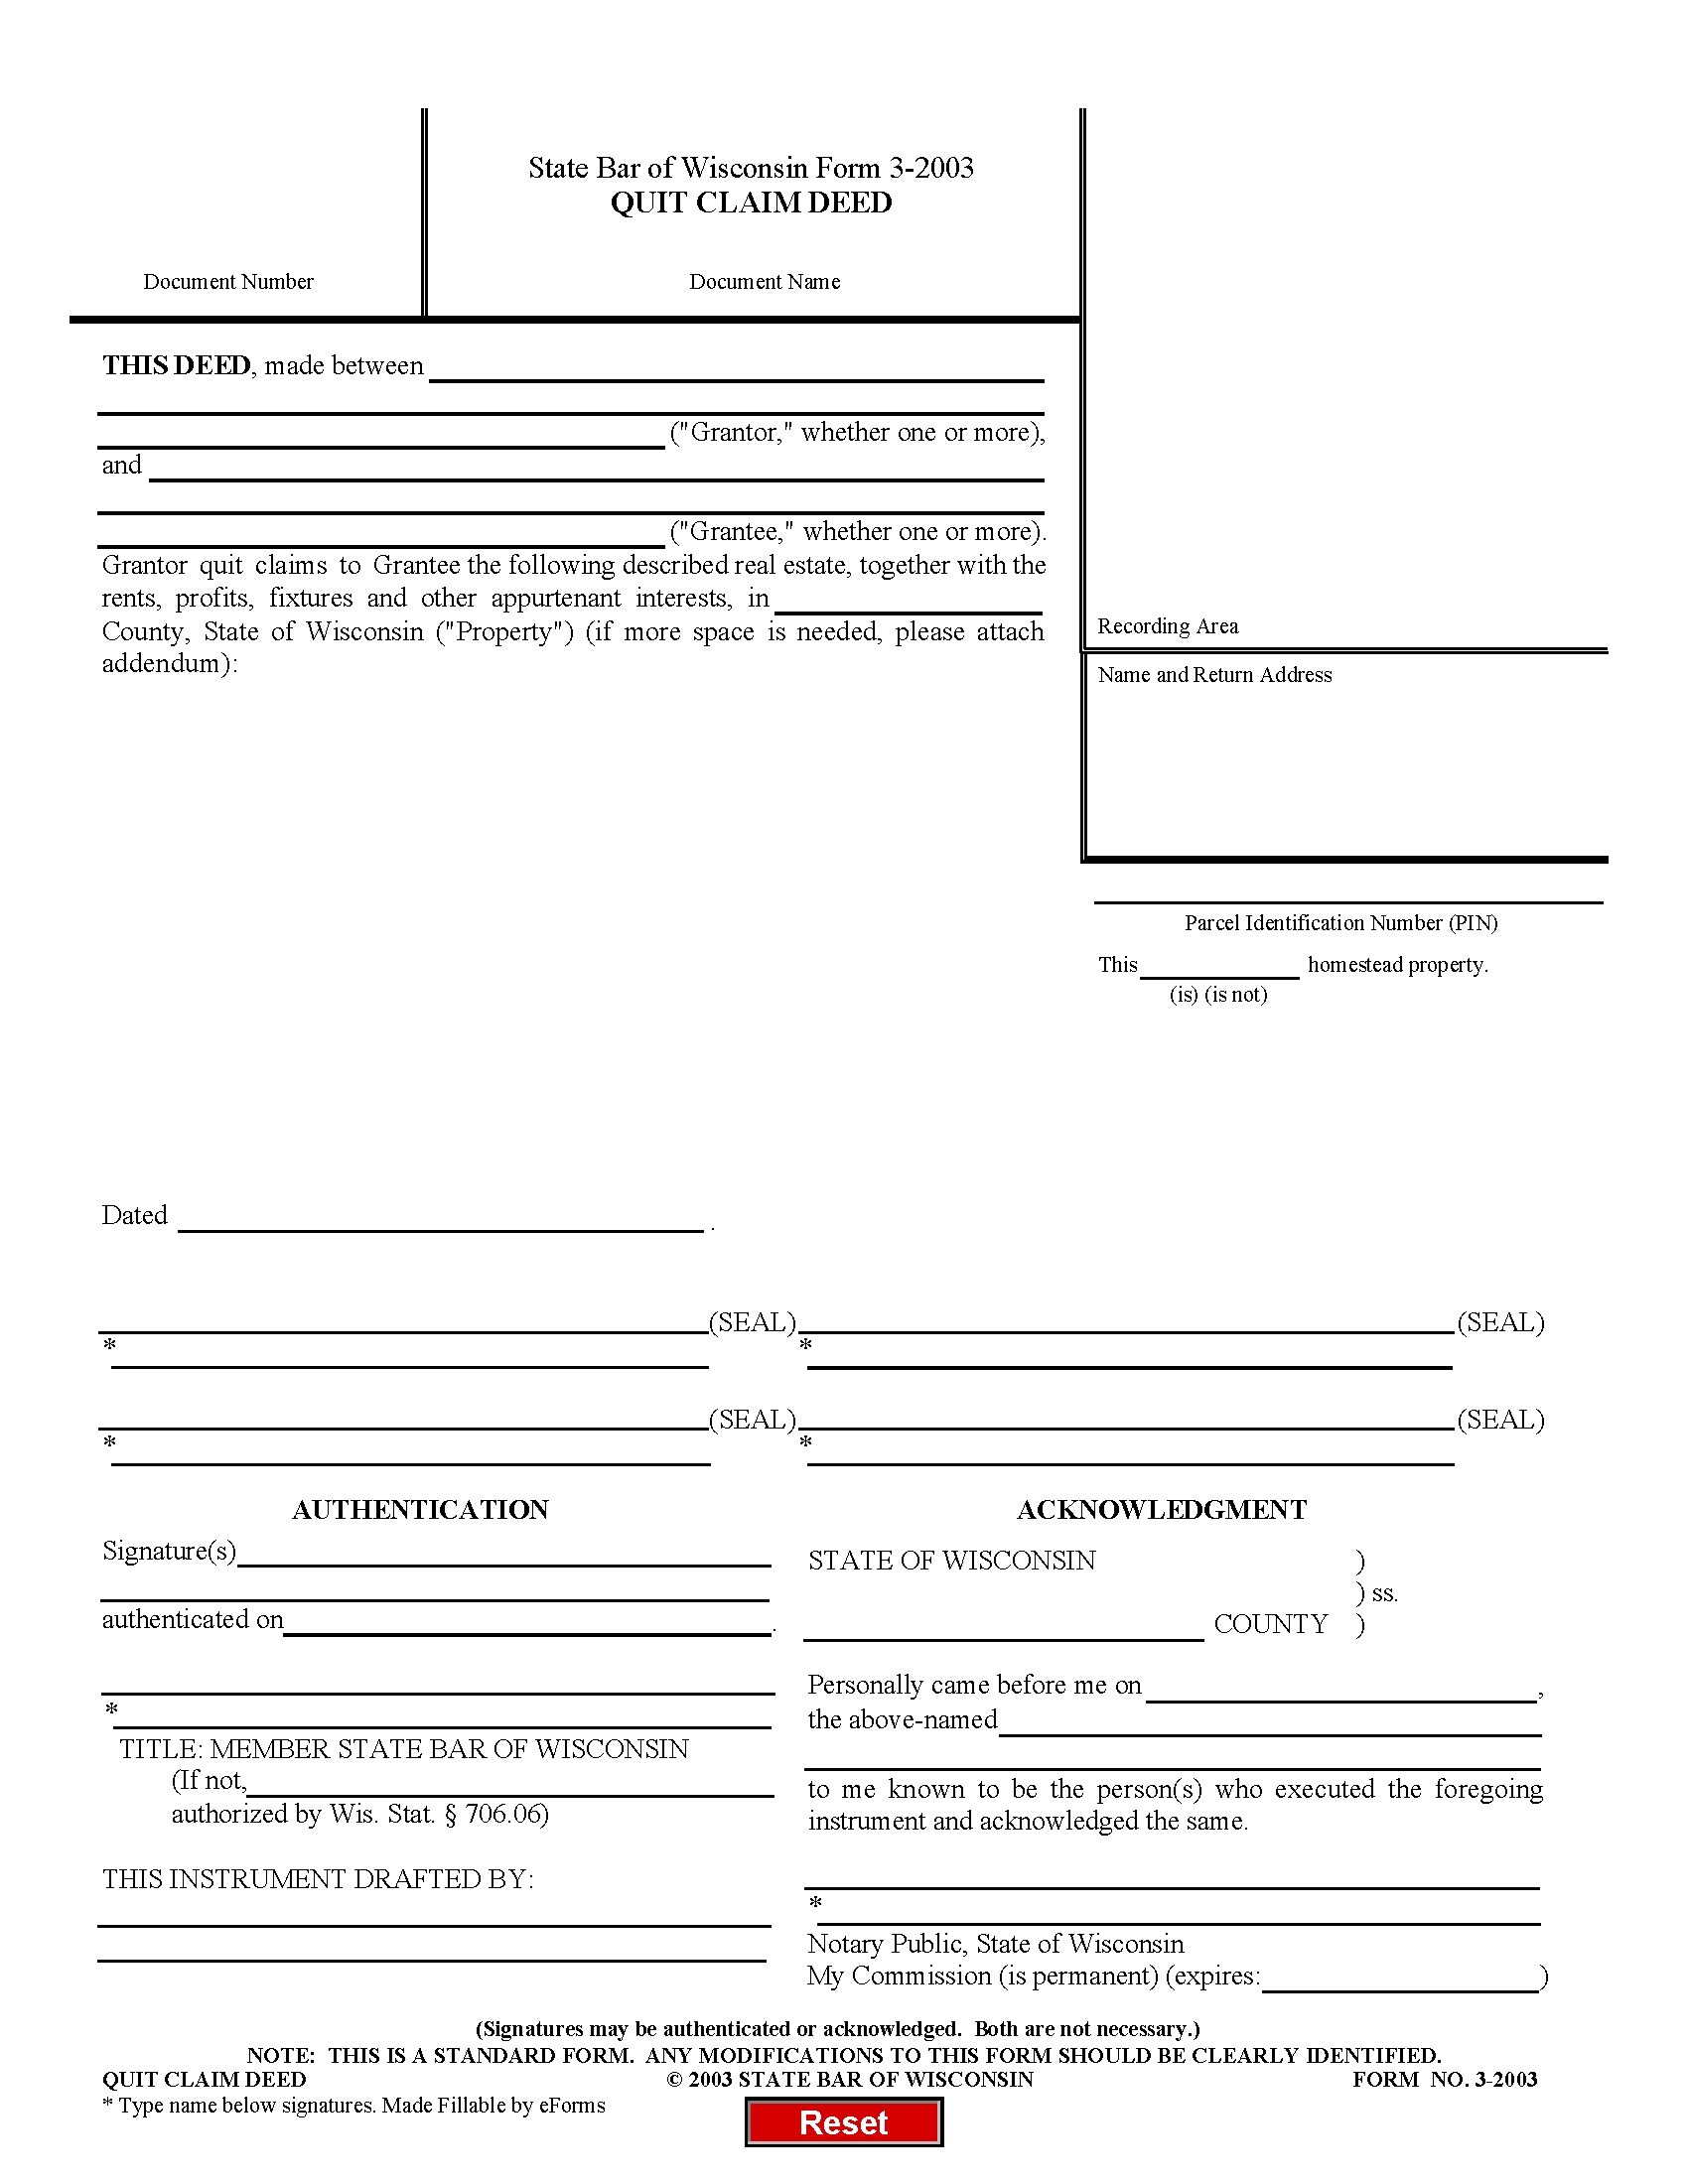 Wisconsin Quit Claim Deed Form Bar Version Form 3 2003 EForms